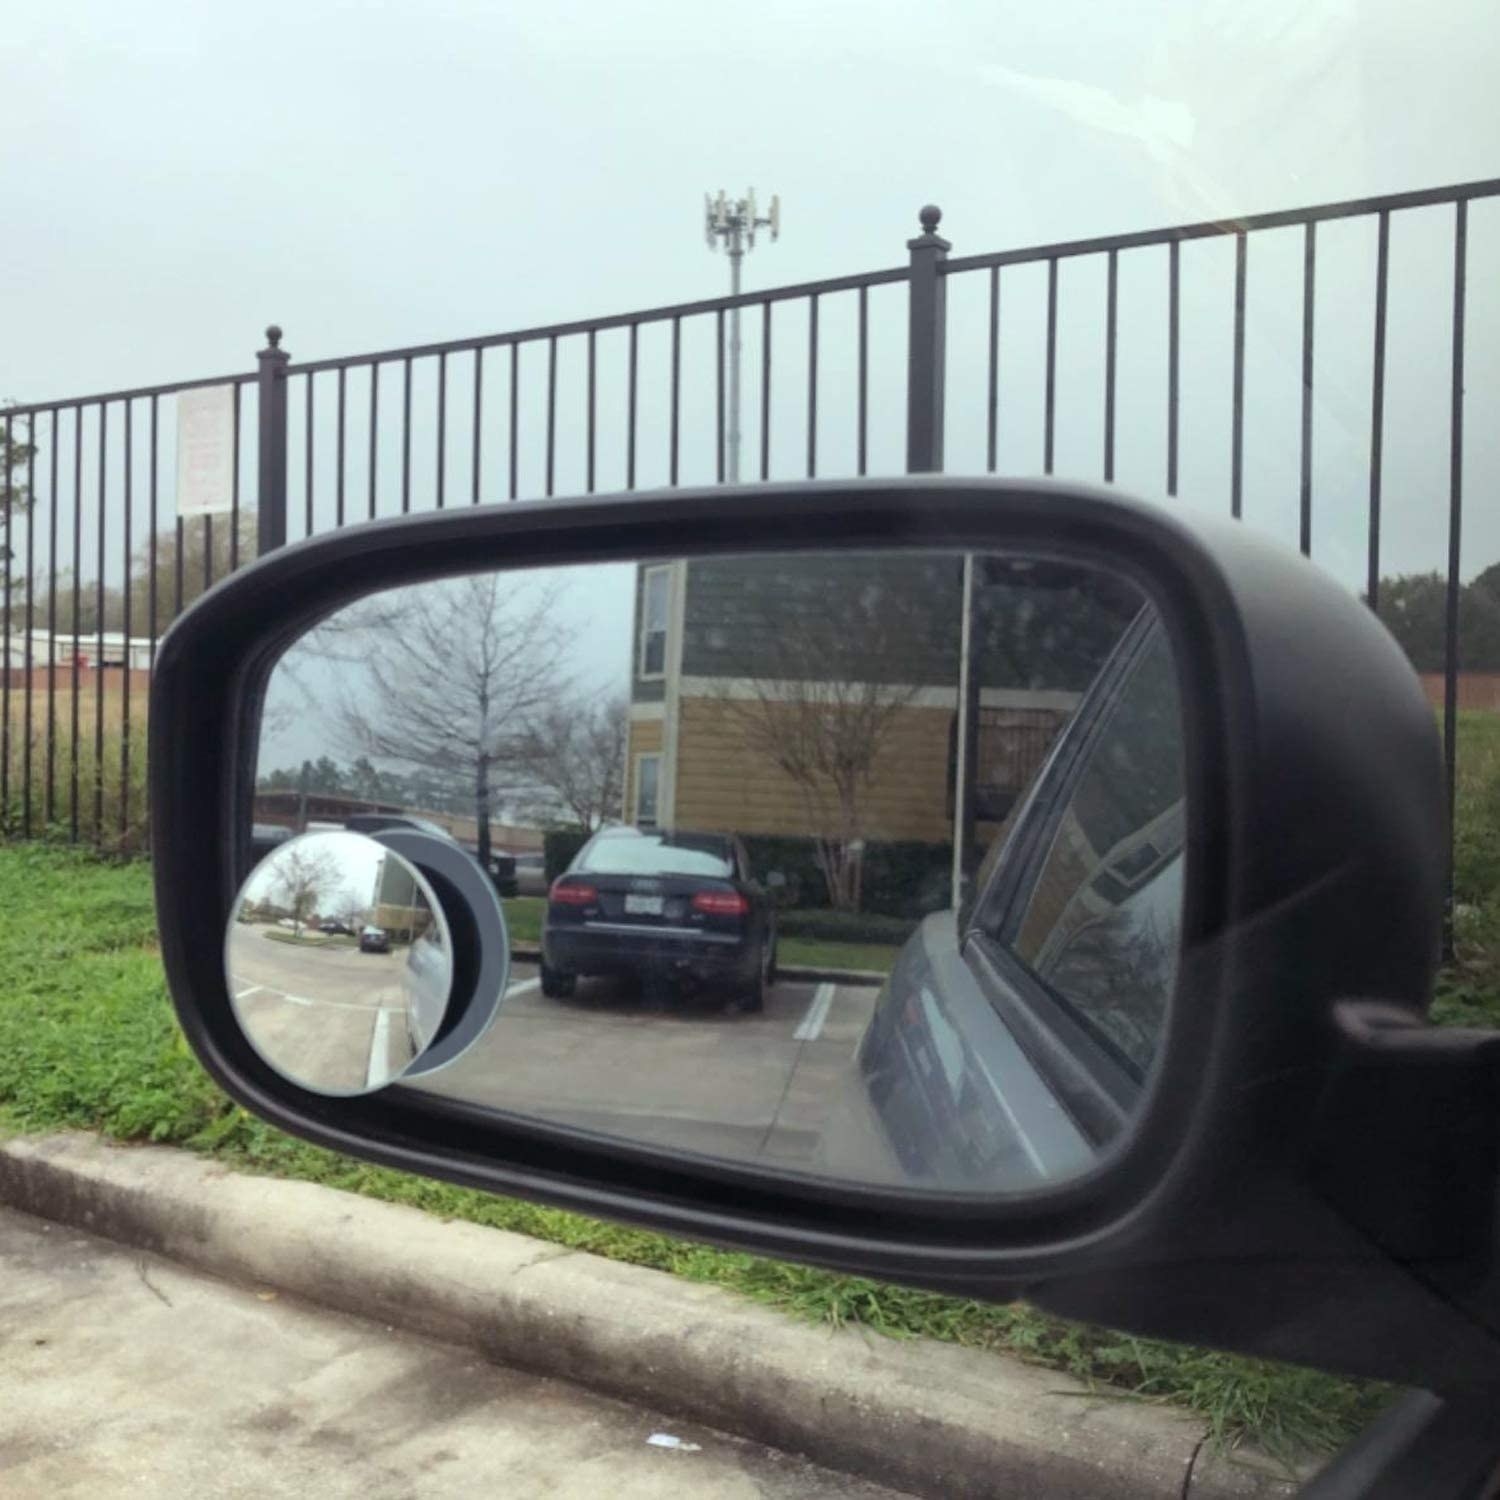 The blind spot mirror stuck on the car mirror